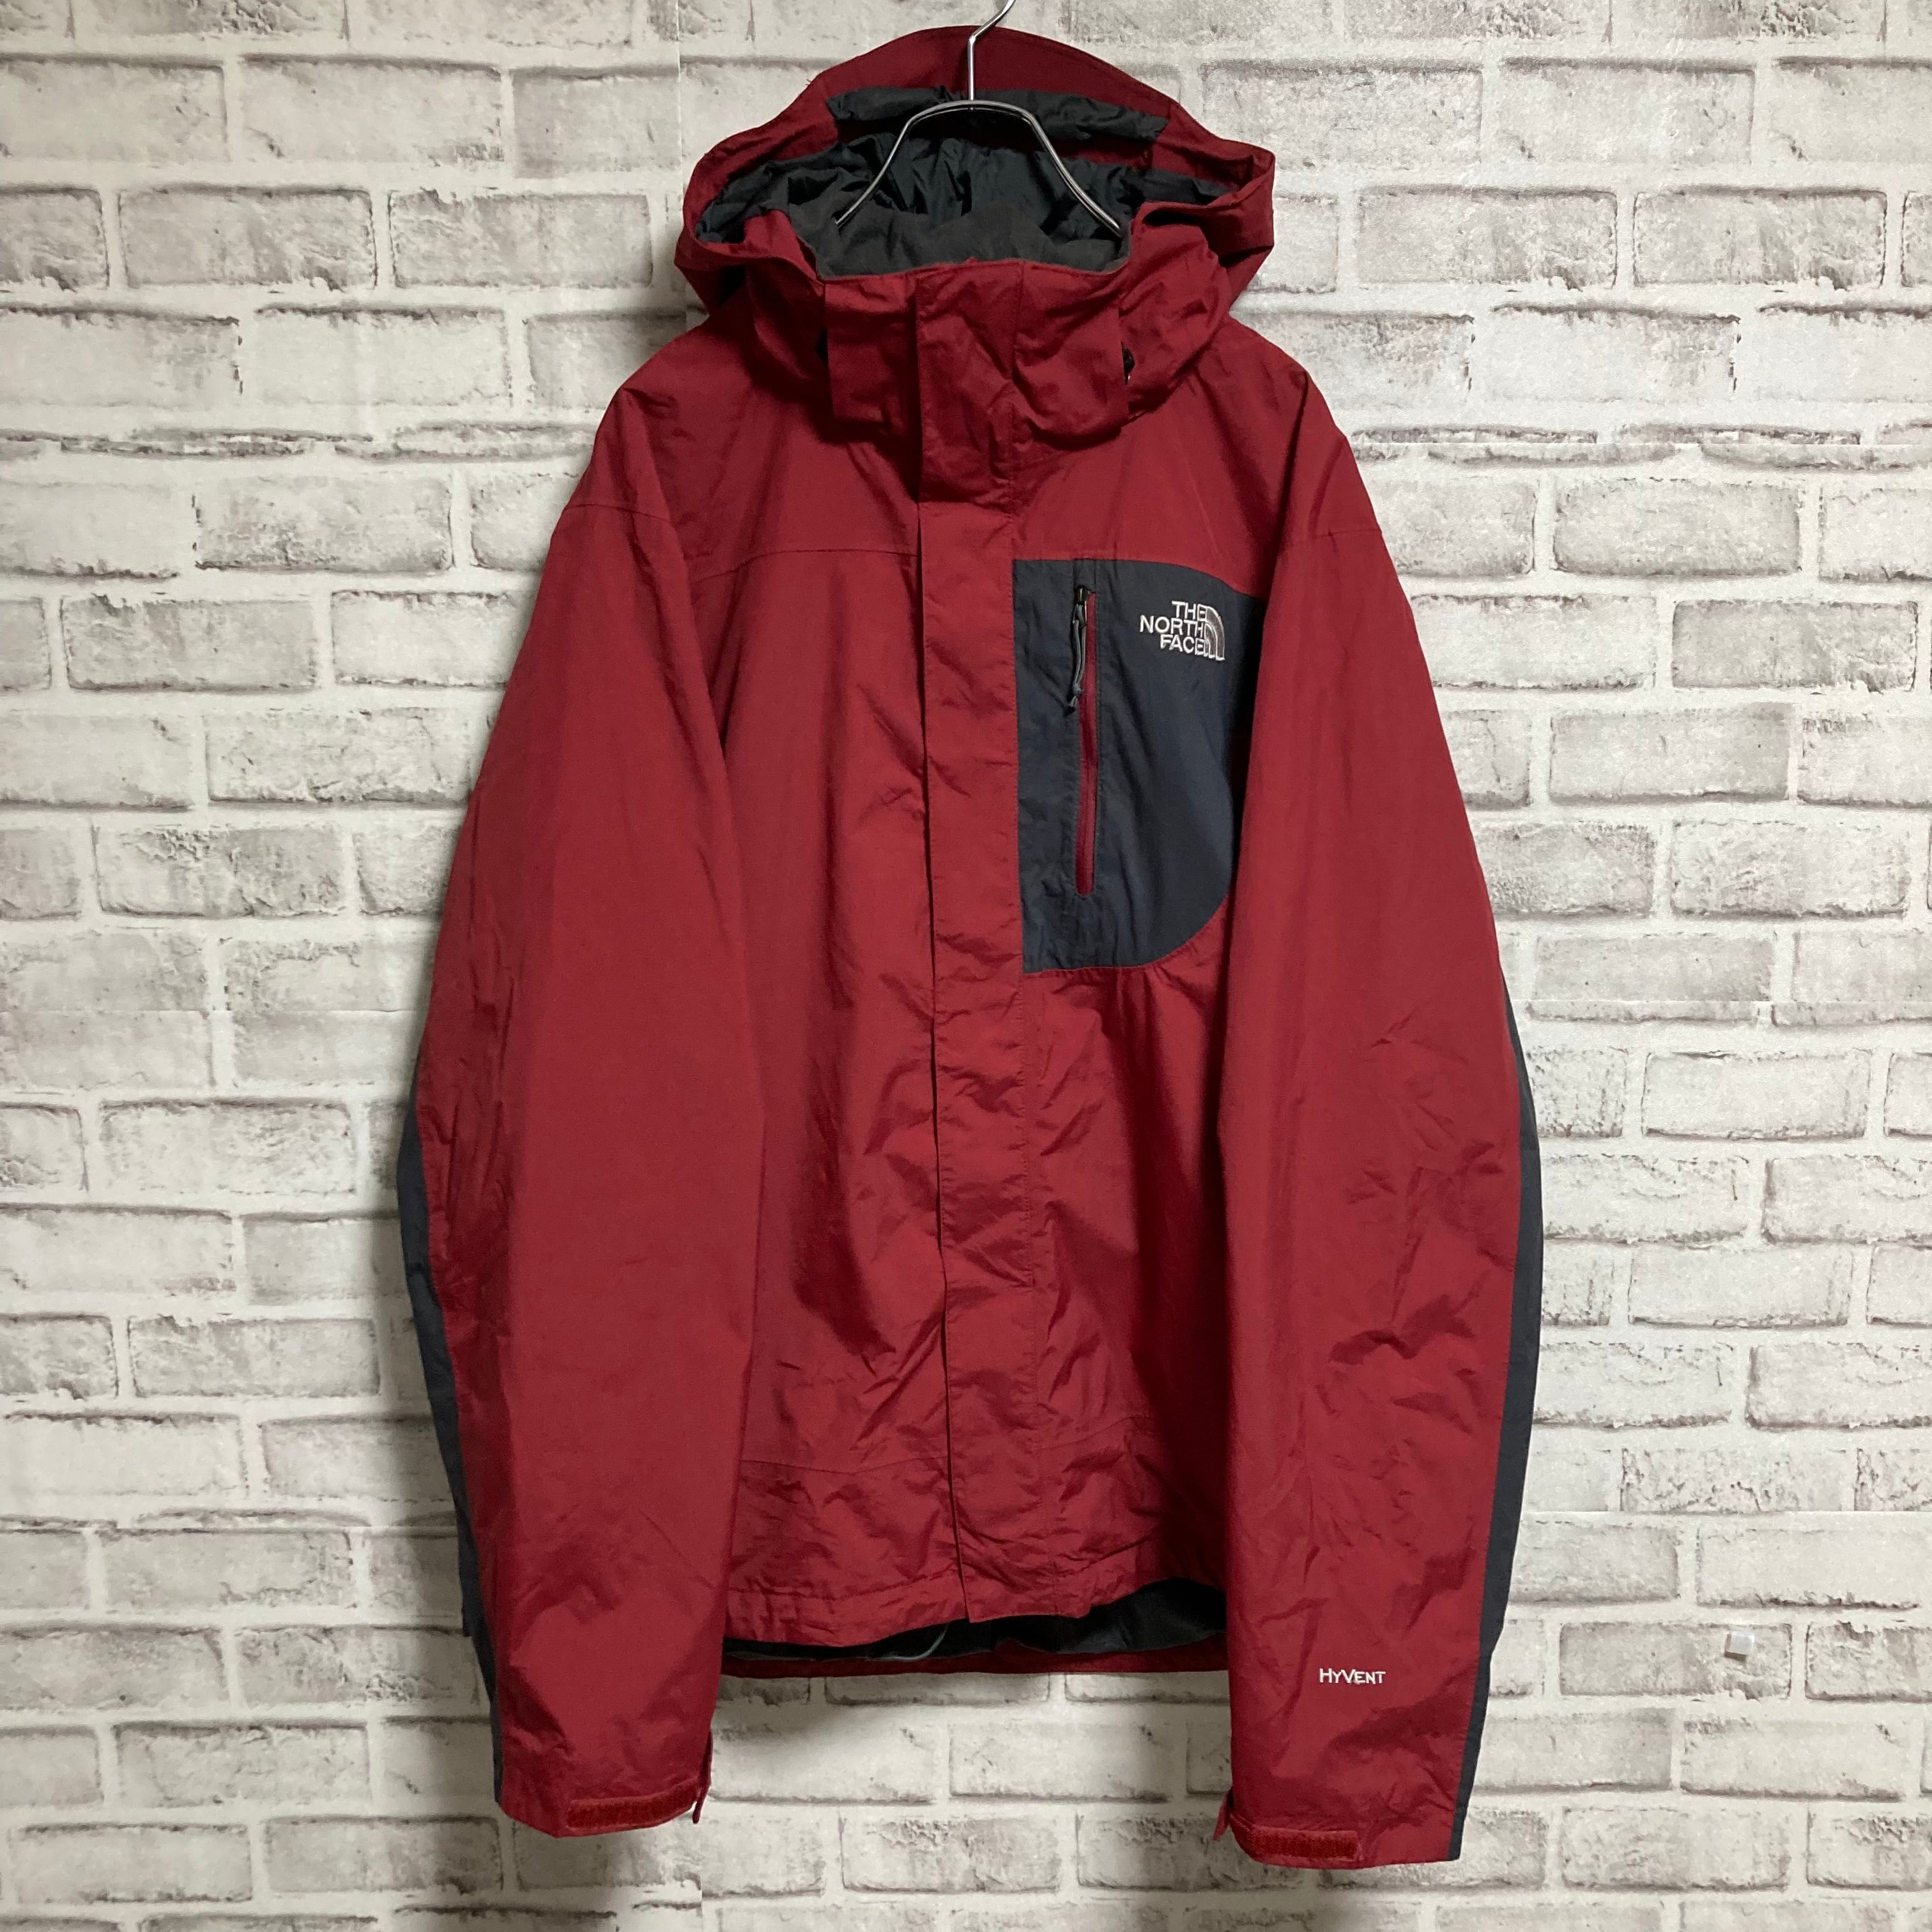 【THE NORTH FACE】Mountain Parka L HYVENT ノースフェイス 